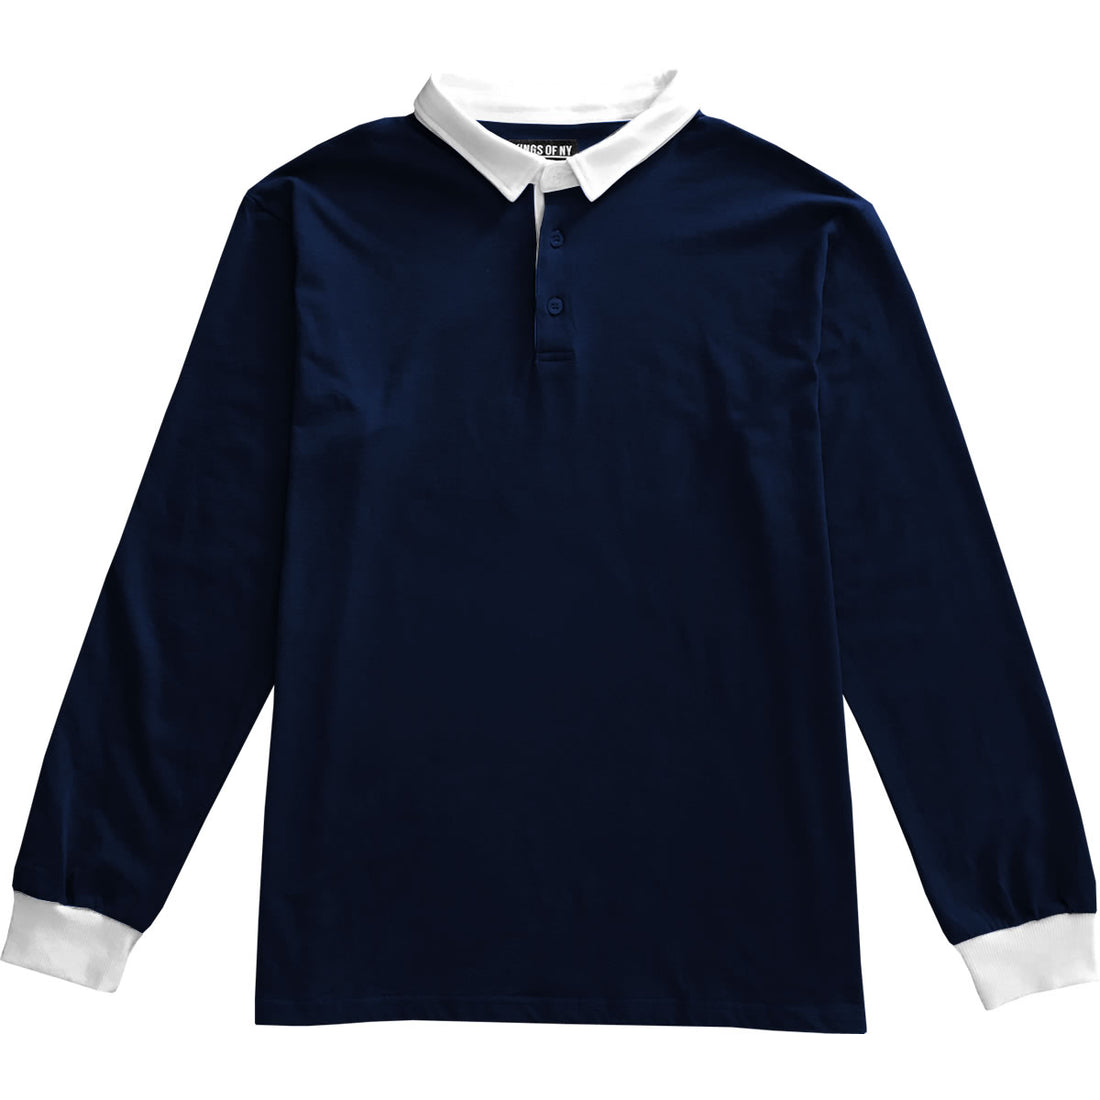 Solid Navy Blue with White Collar Mens Long Sleeve Polo Rugby Shirt